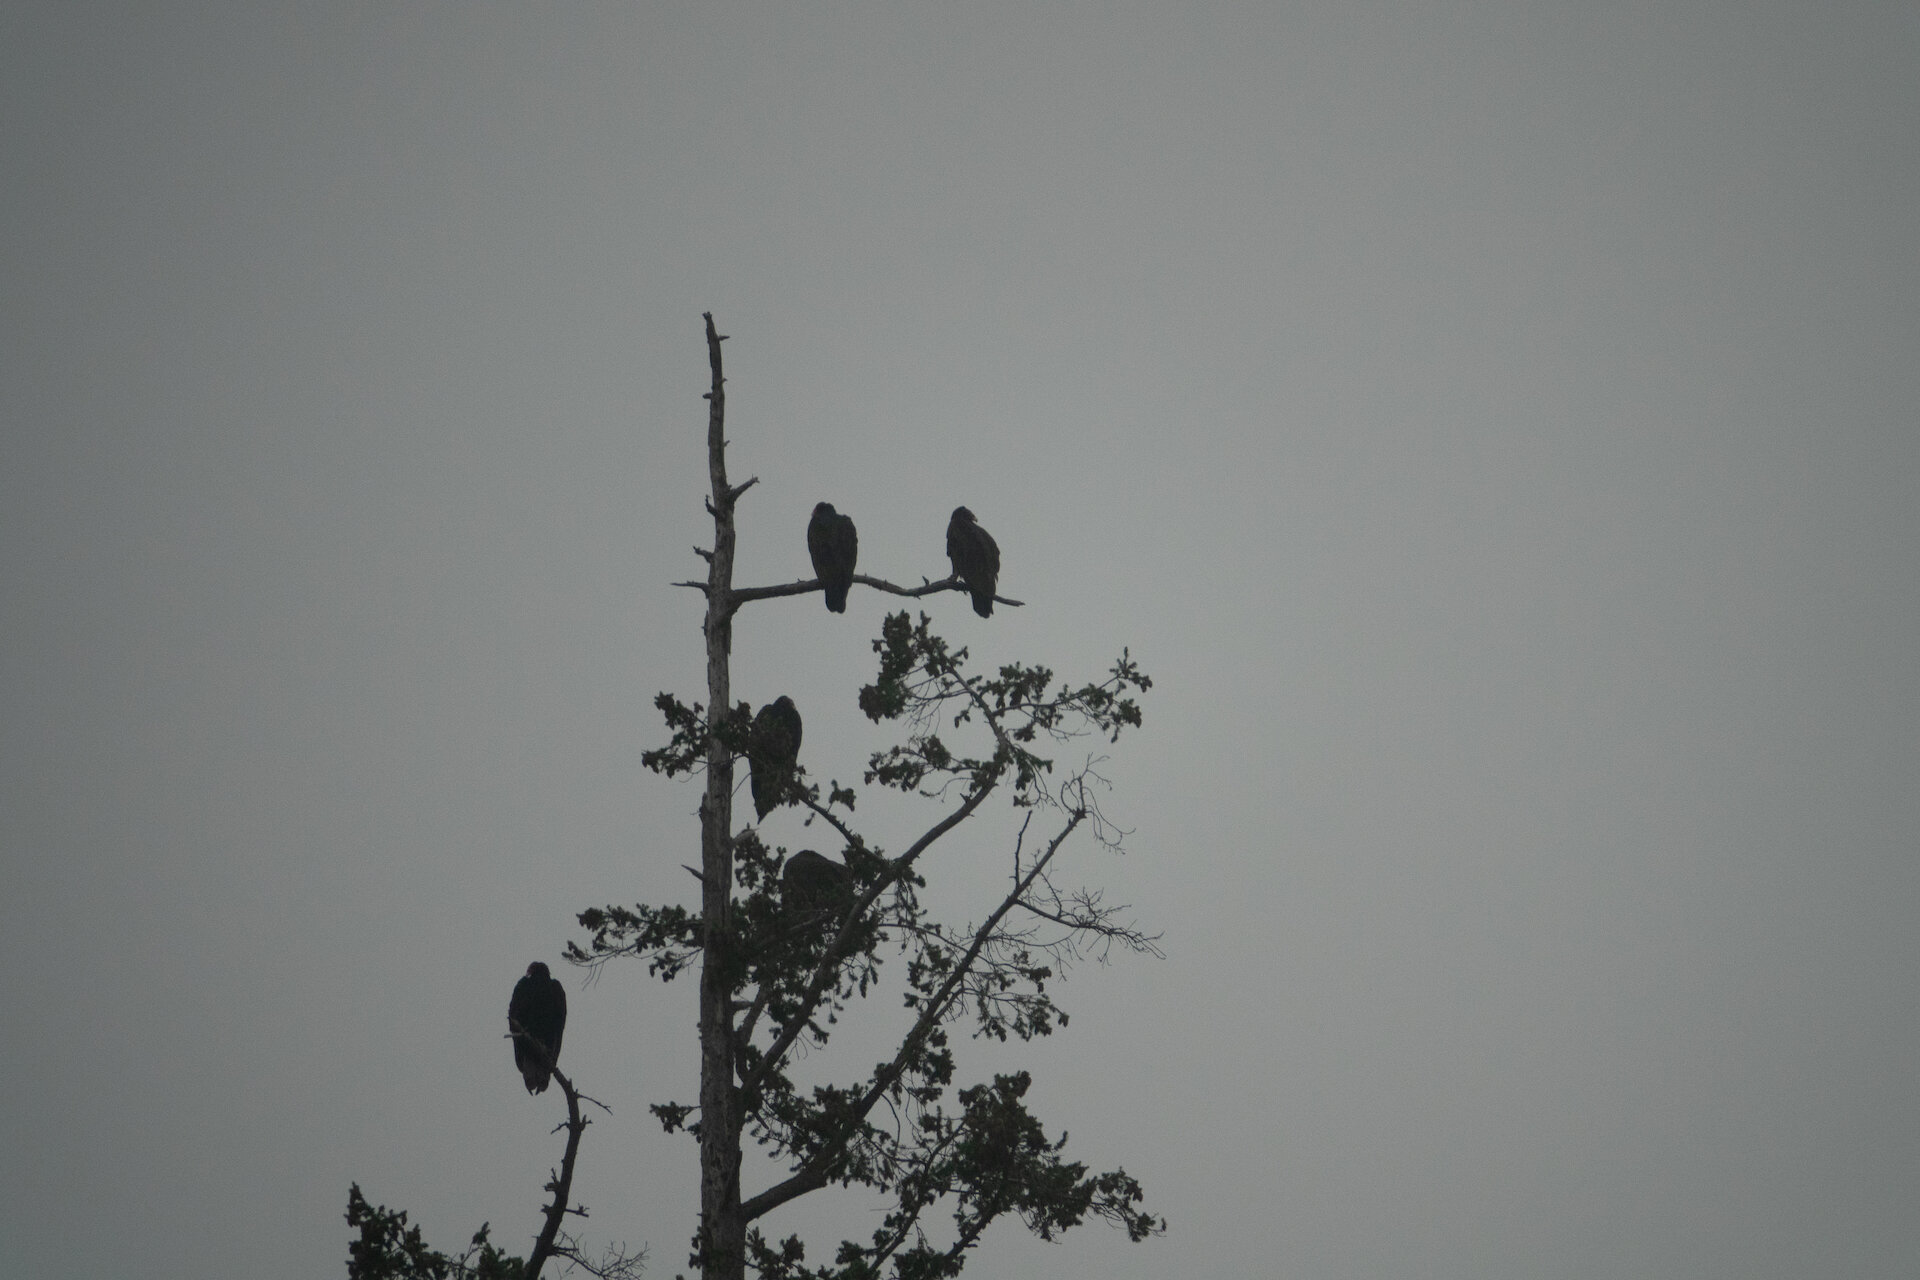  The smoke was so bad all the turkey vultures were grounded. This tree near the water was covered in them! 